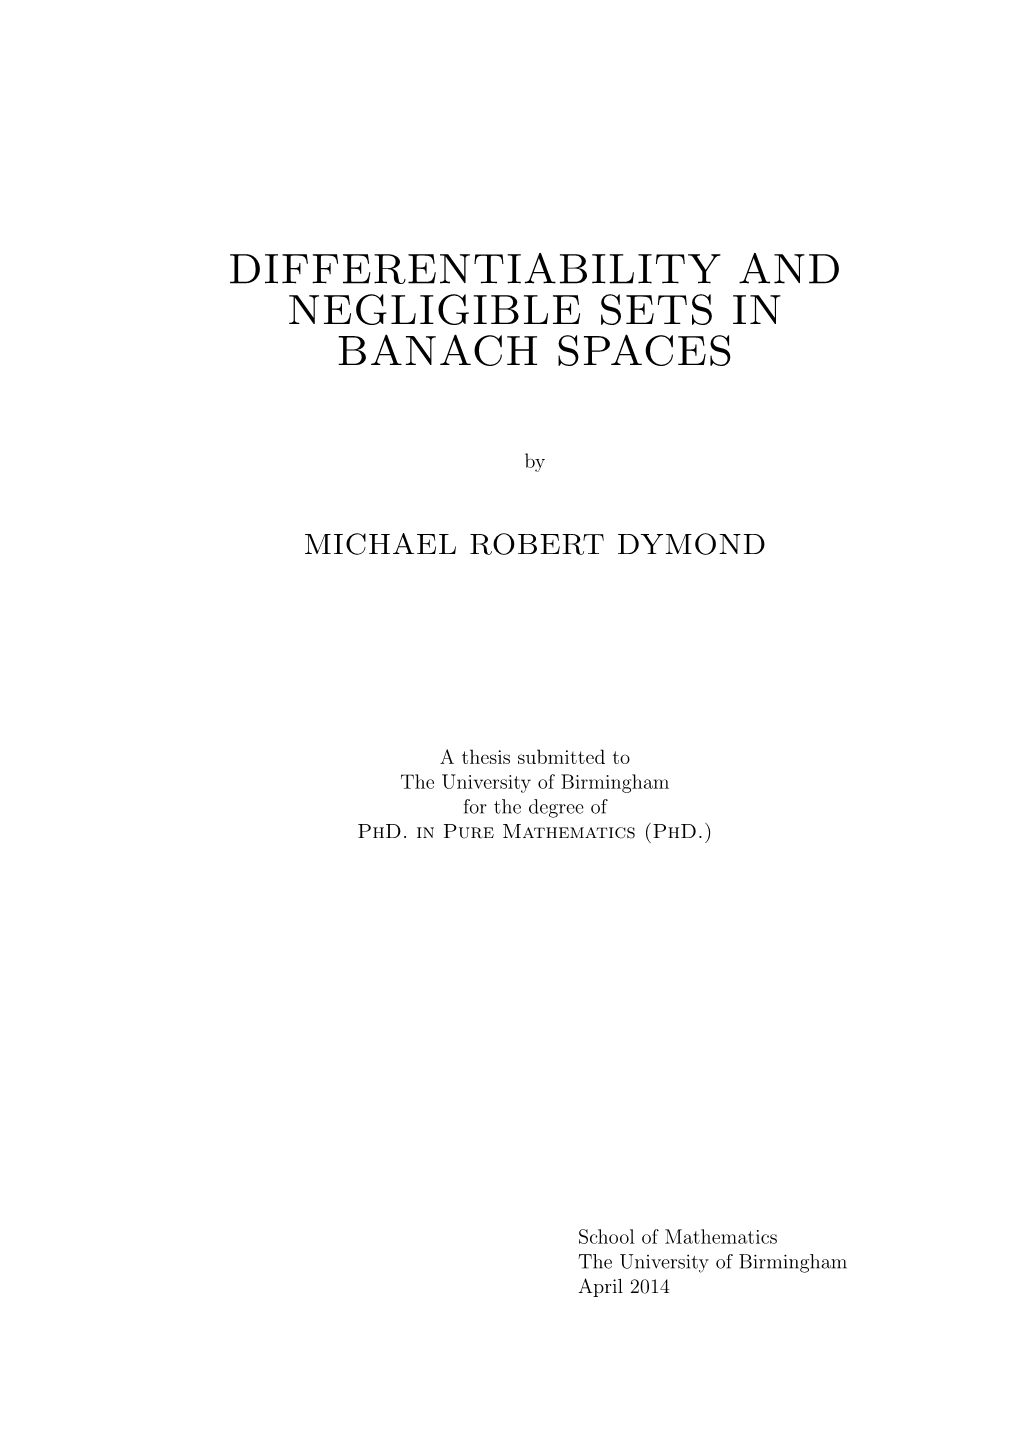 Differentiability and Negligible Sets in Banach Spaces